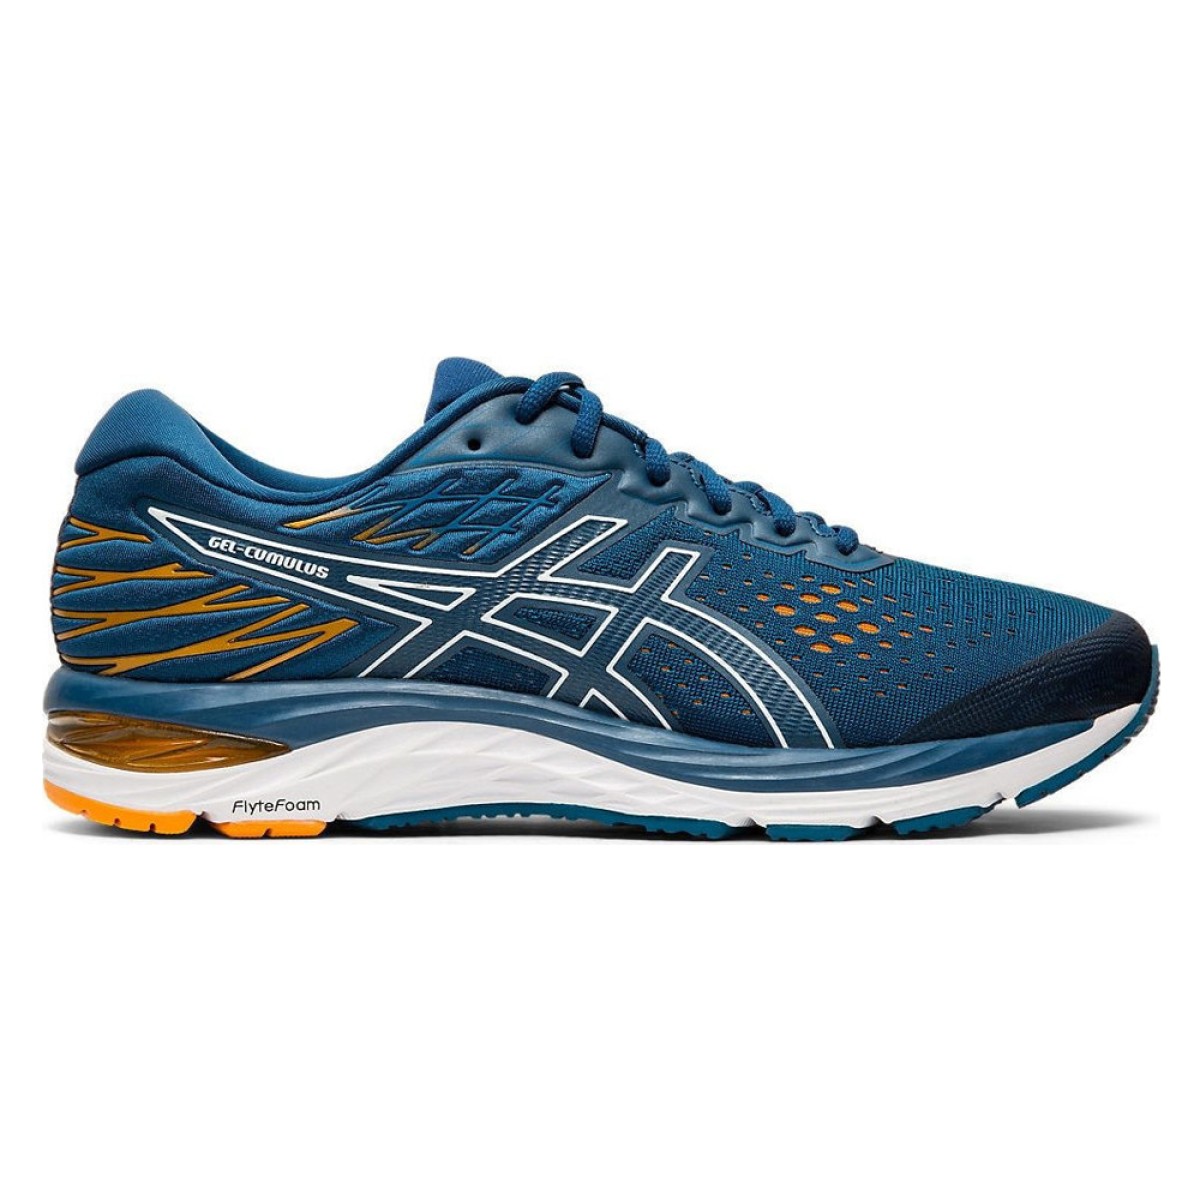 The men's GEL-CUMULUS™ 21 performance road running shoe by ASICS is ...